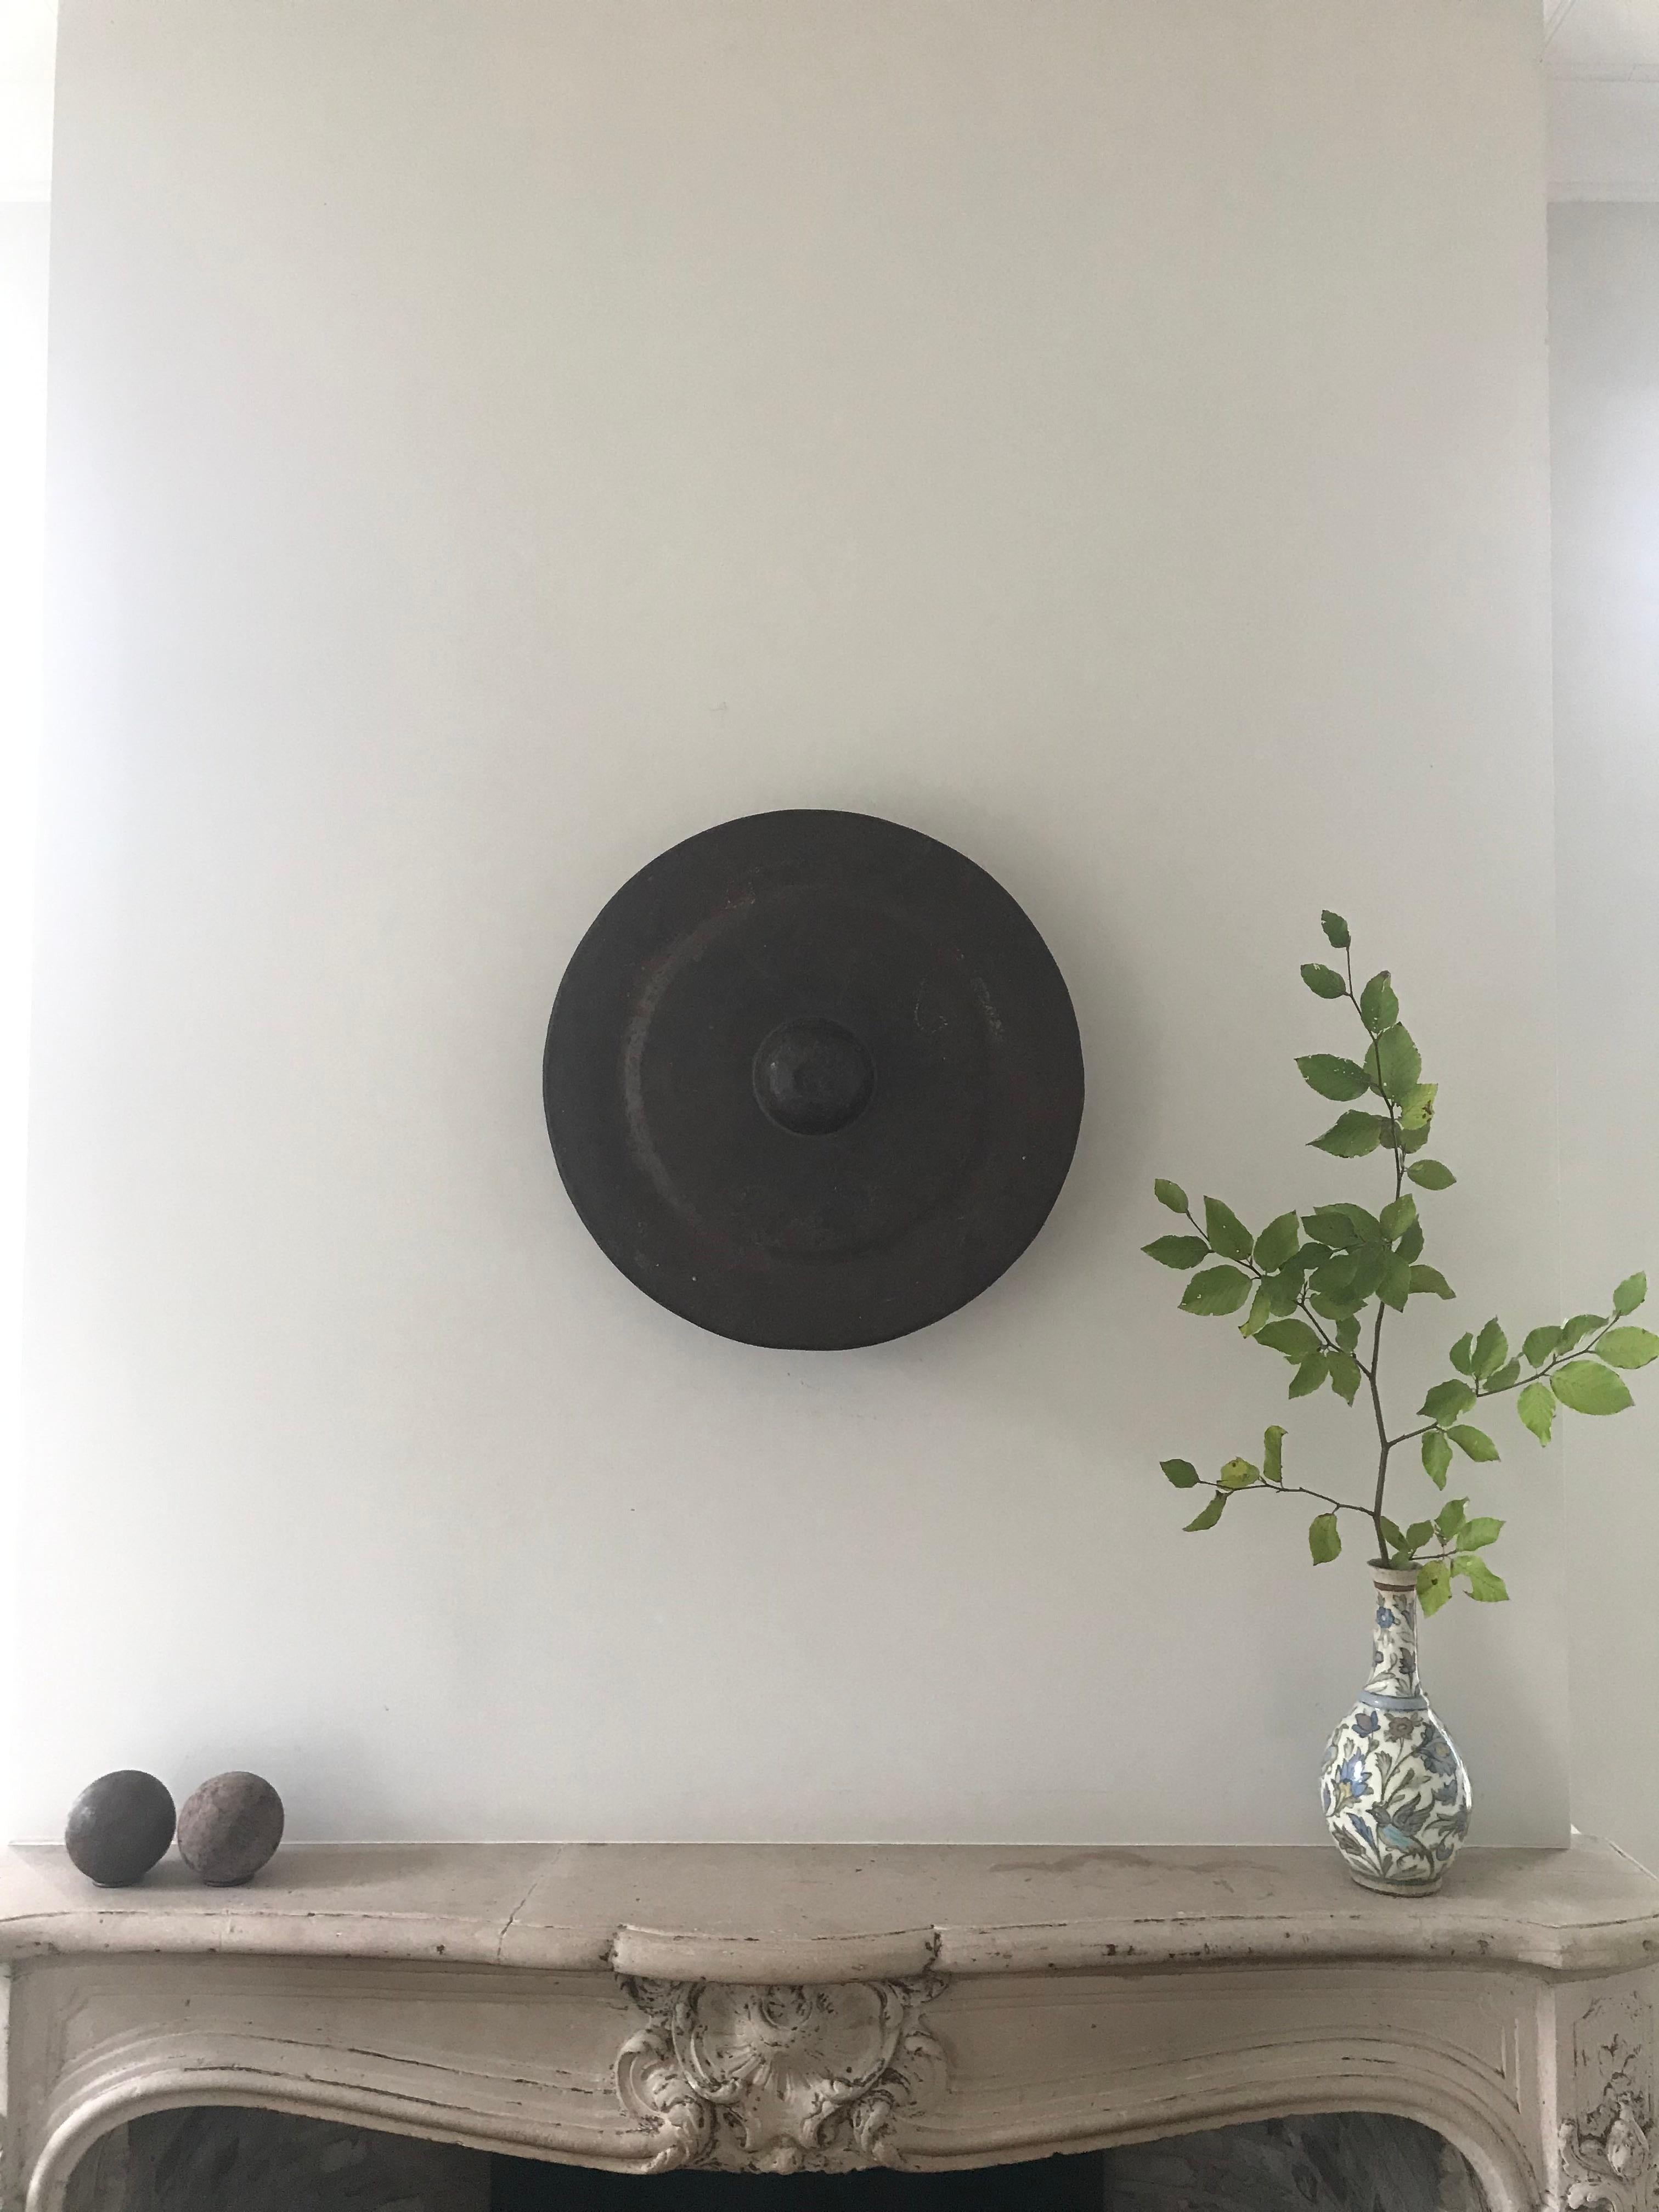 This unique Asian item is a percussion instrument in the form of a hanging round bronze plate that is bent at the edge.

Authentic Chinese bronze gong, once used in processions and religious ceremonies.
The sound is literally 'gong'.
The gong